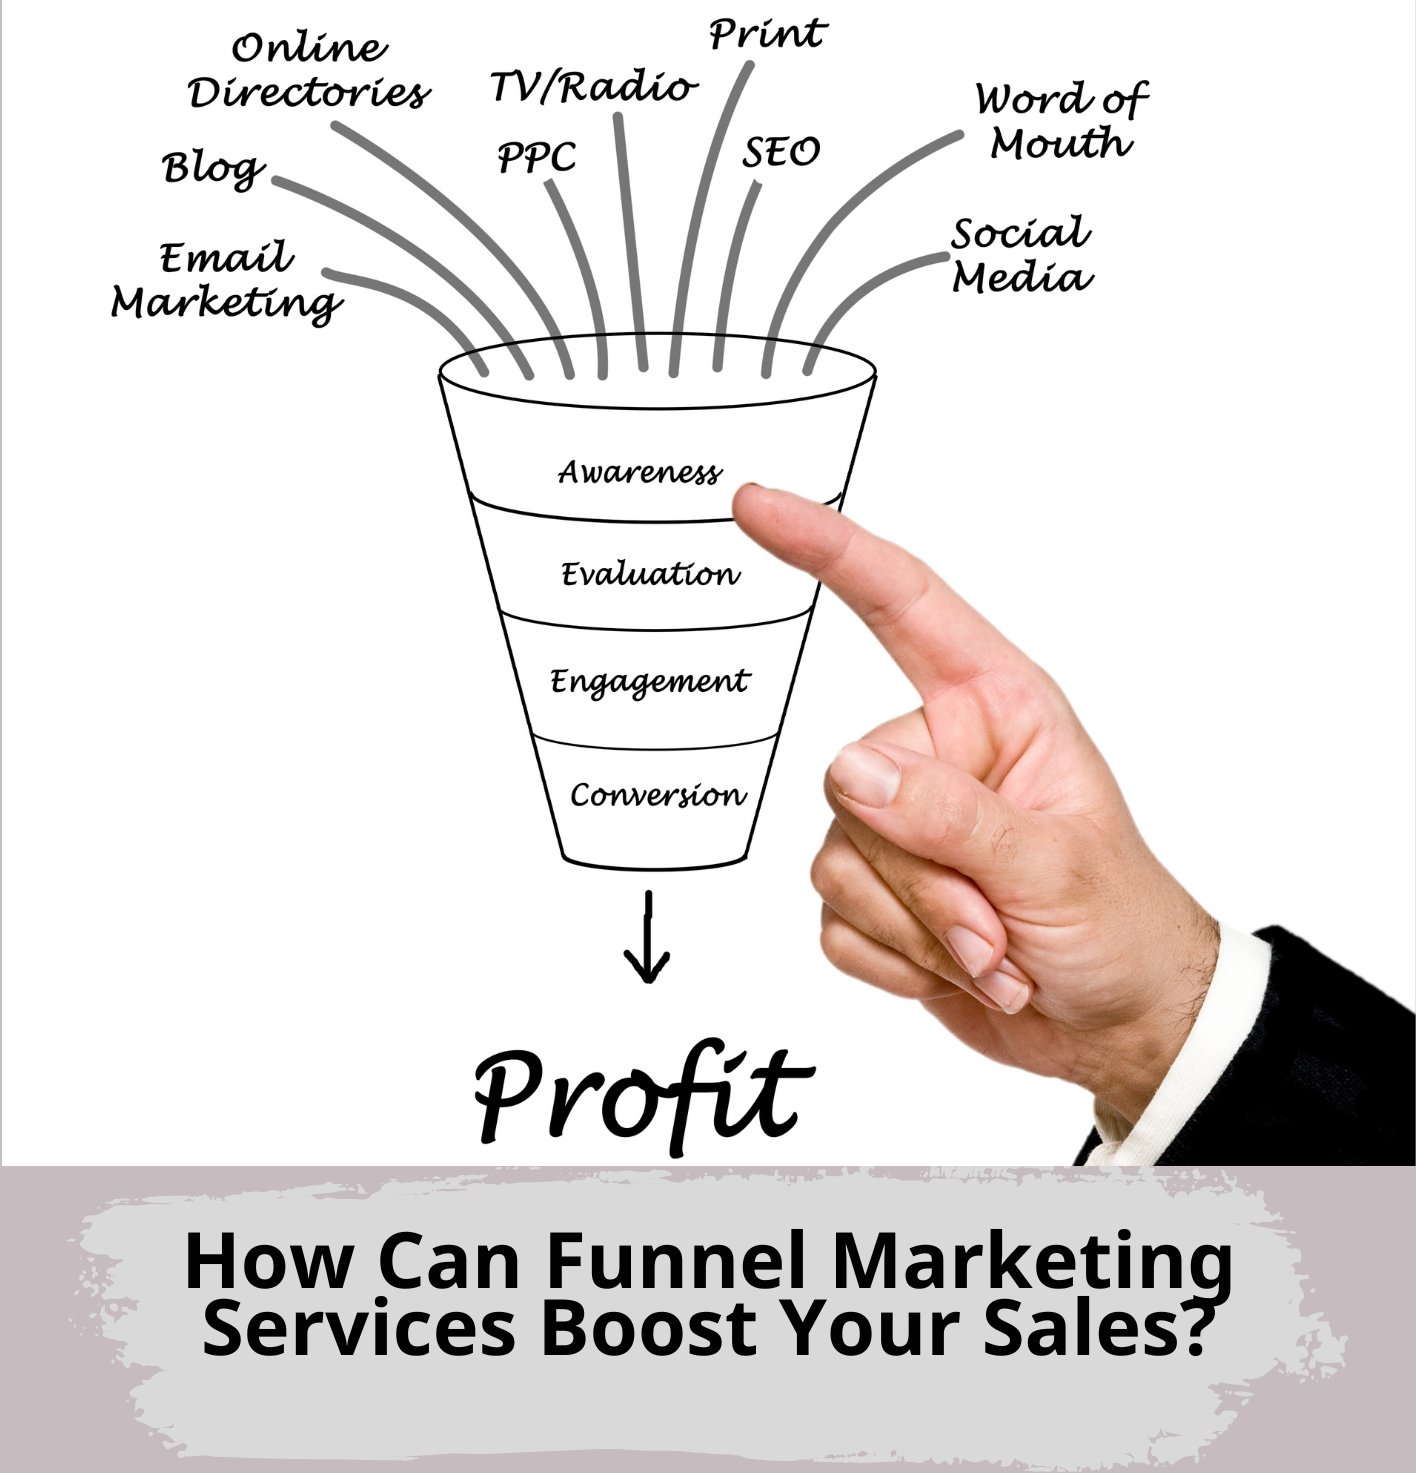 How Can Funnel Marketing Services Boost Your Sales?